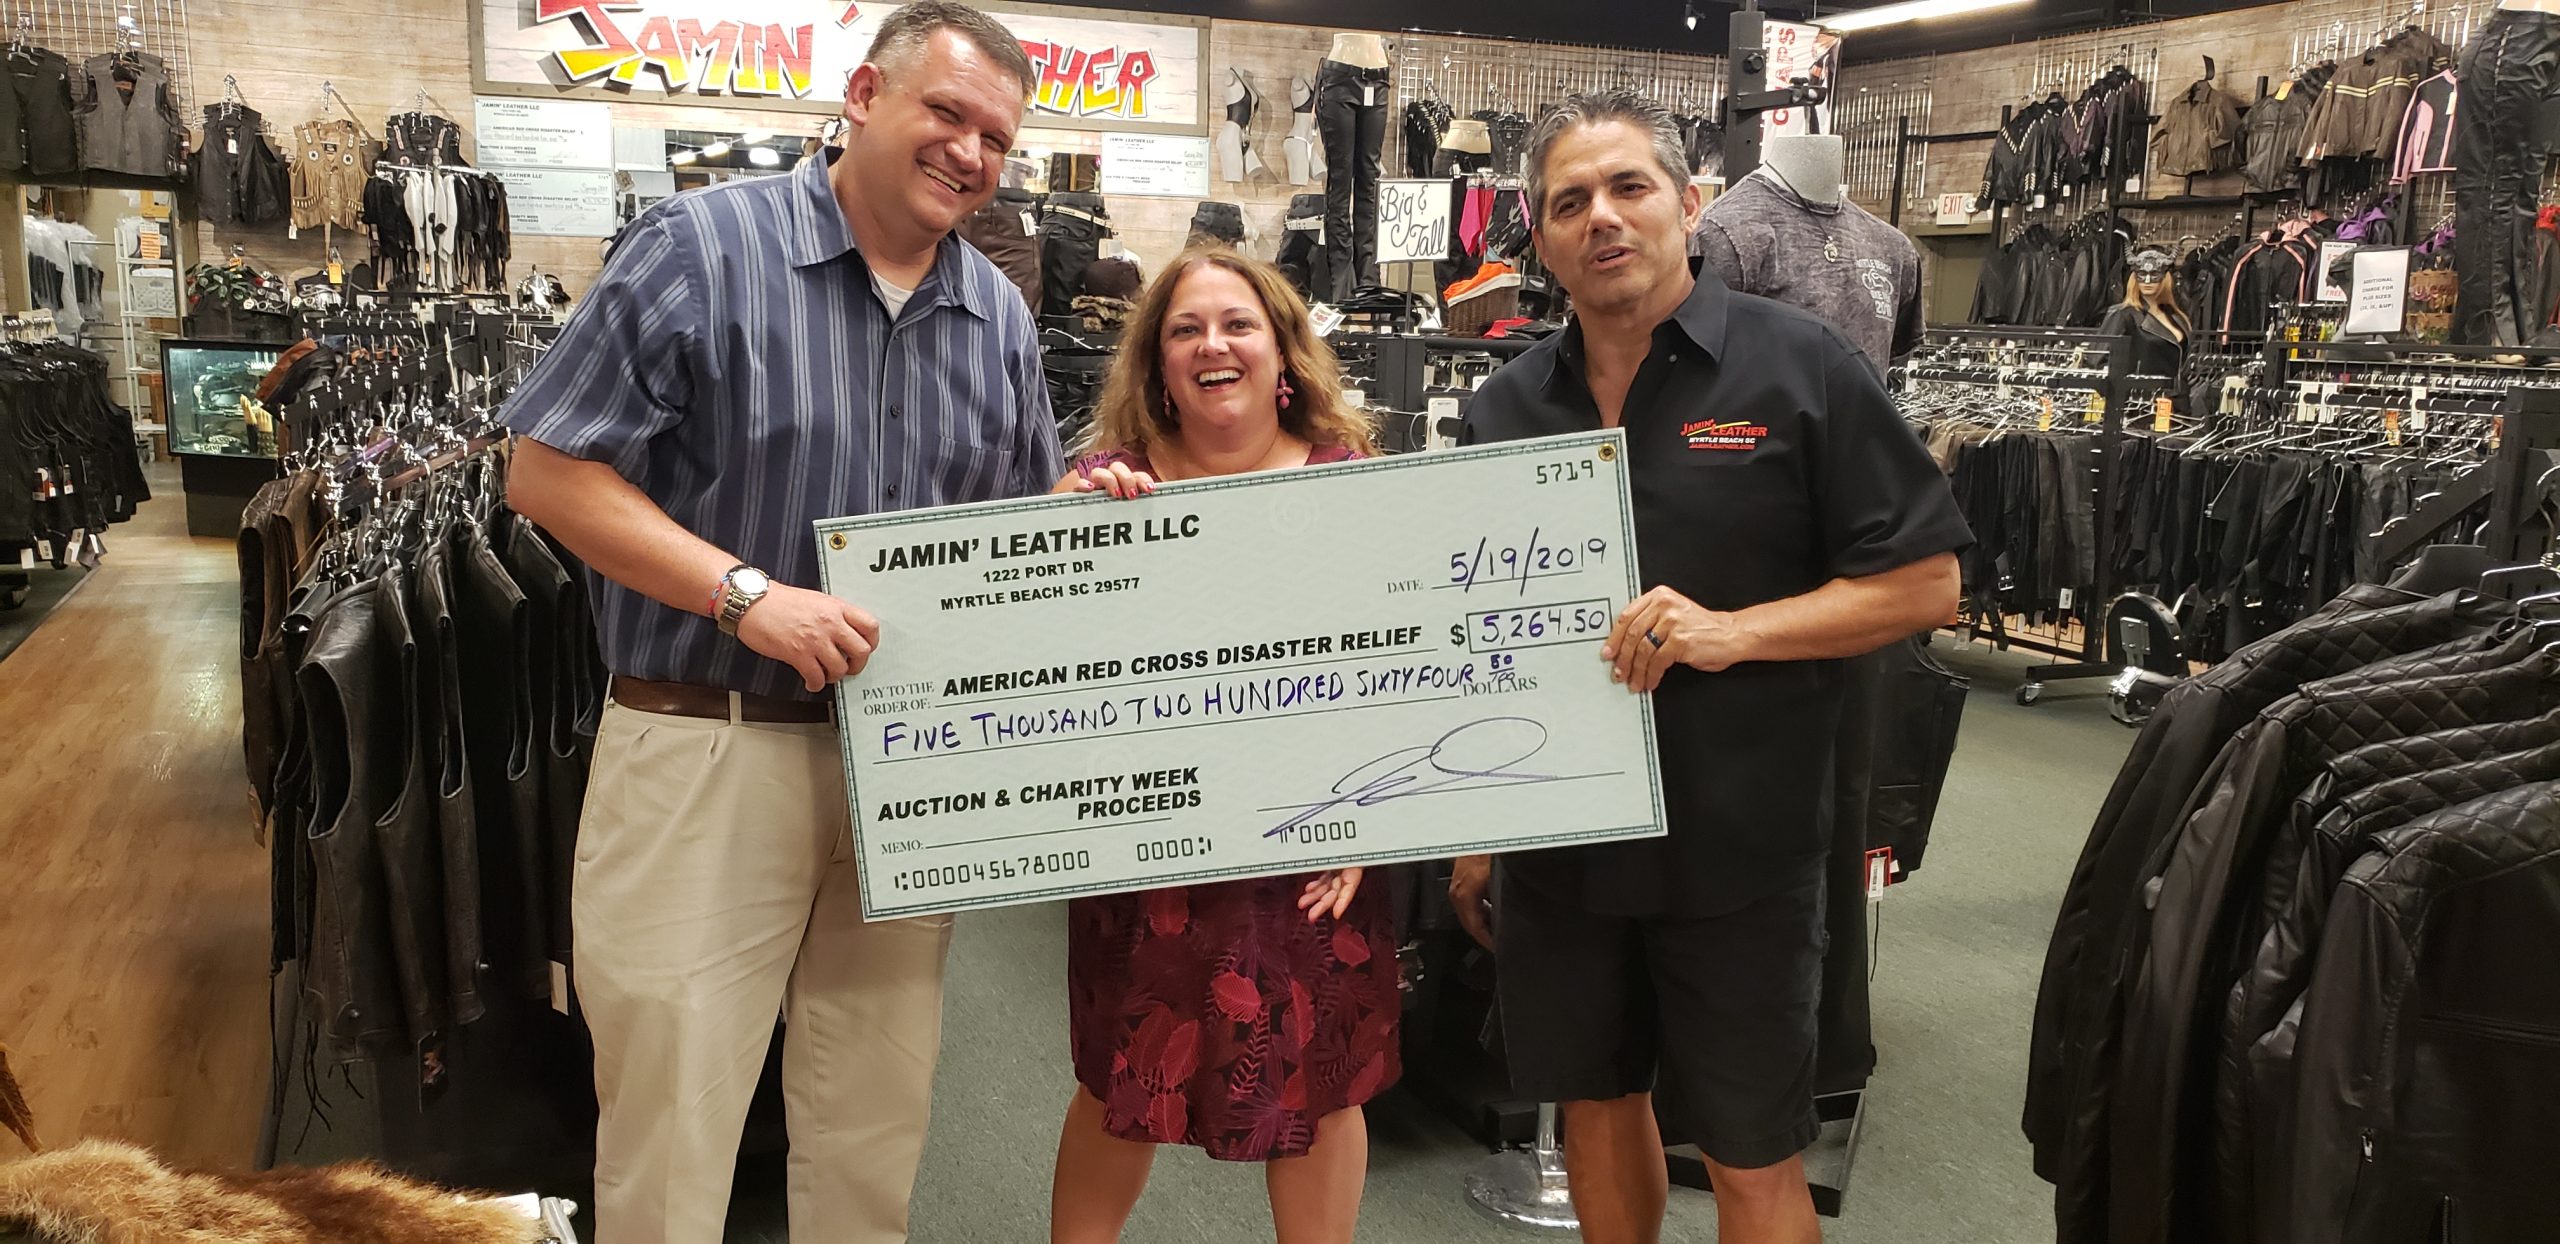 JAMIN LEATHER DONATES TO AMERICAN RED CROSS